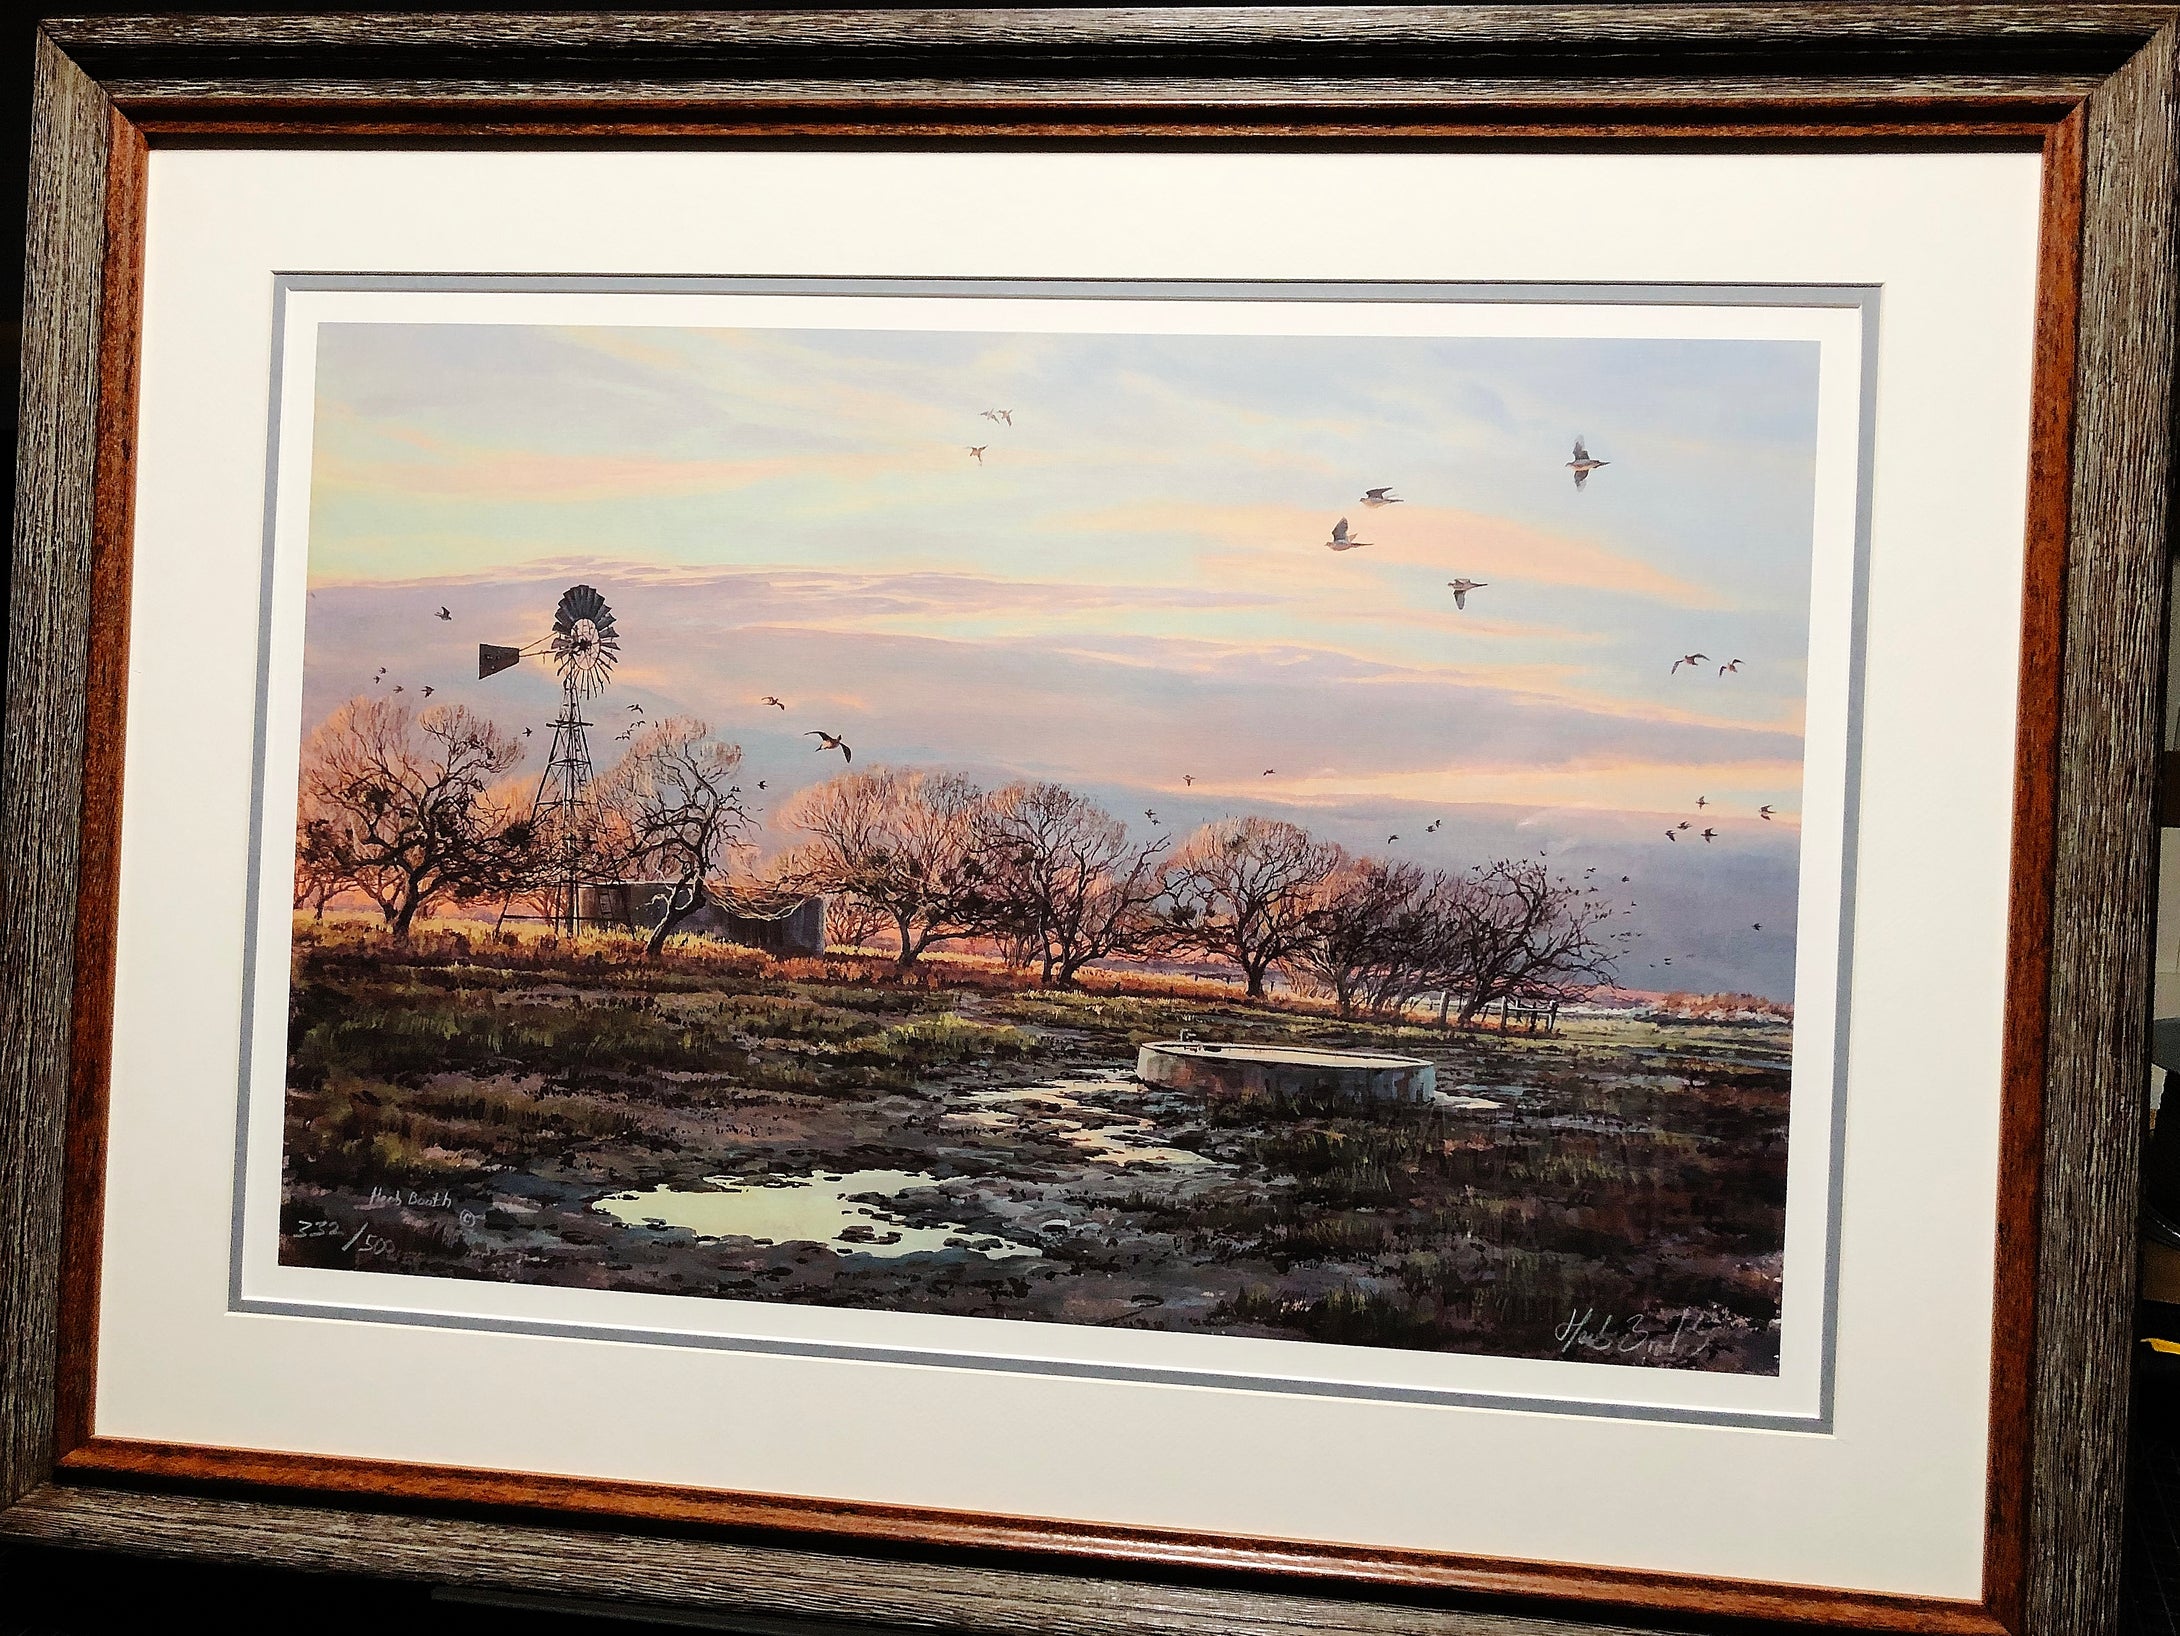 Herb Booth Winter Dove Lithograph - Brand New Custom Sporting Frame